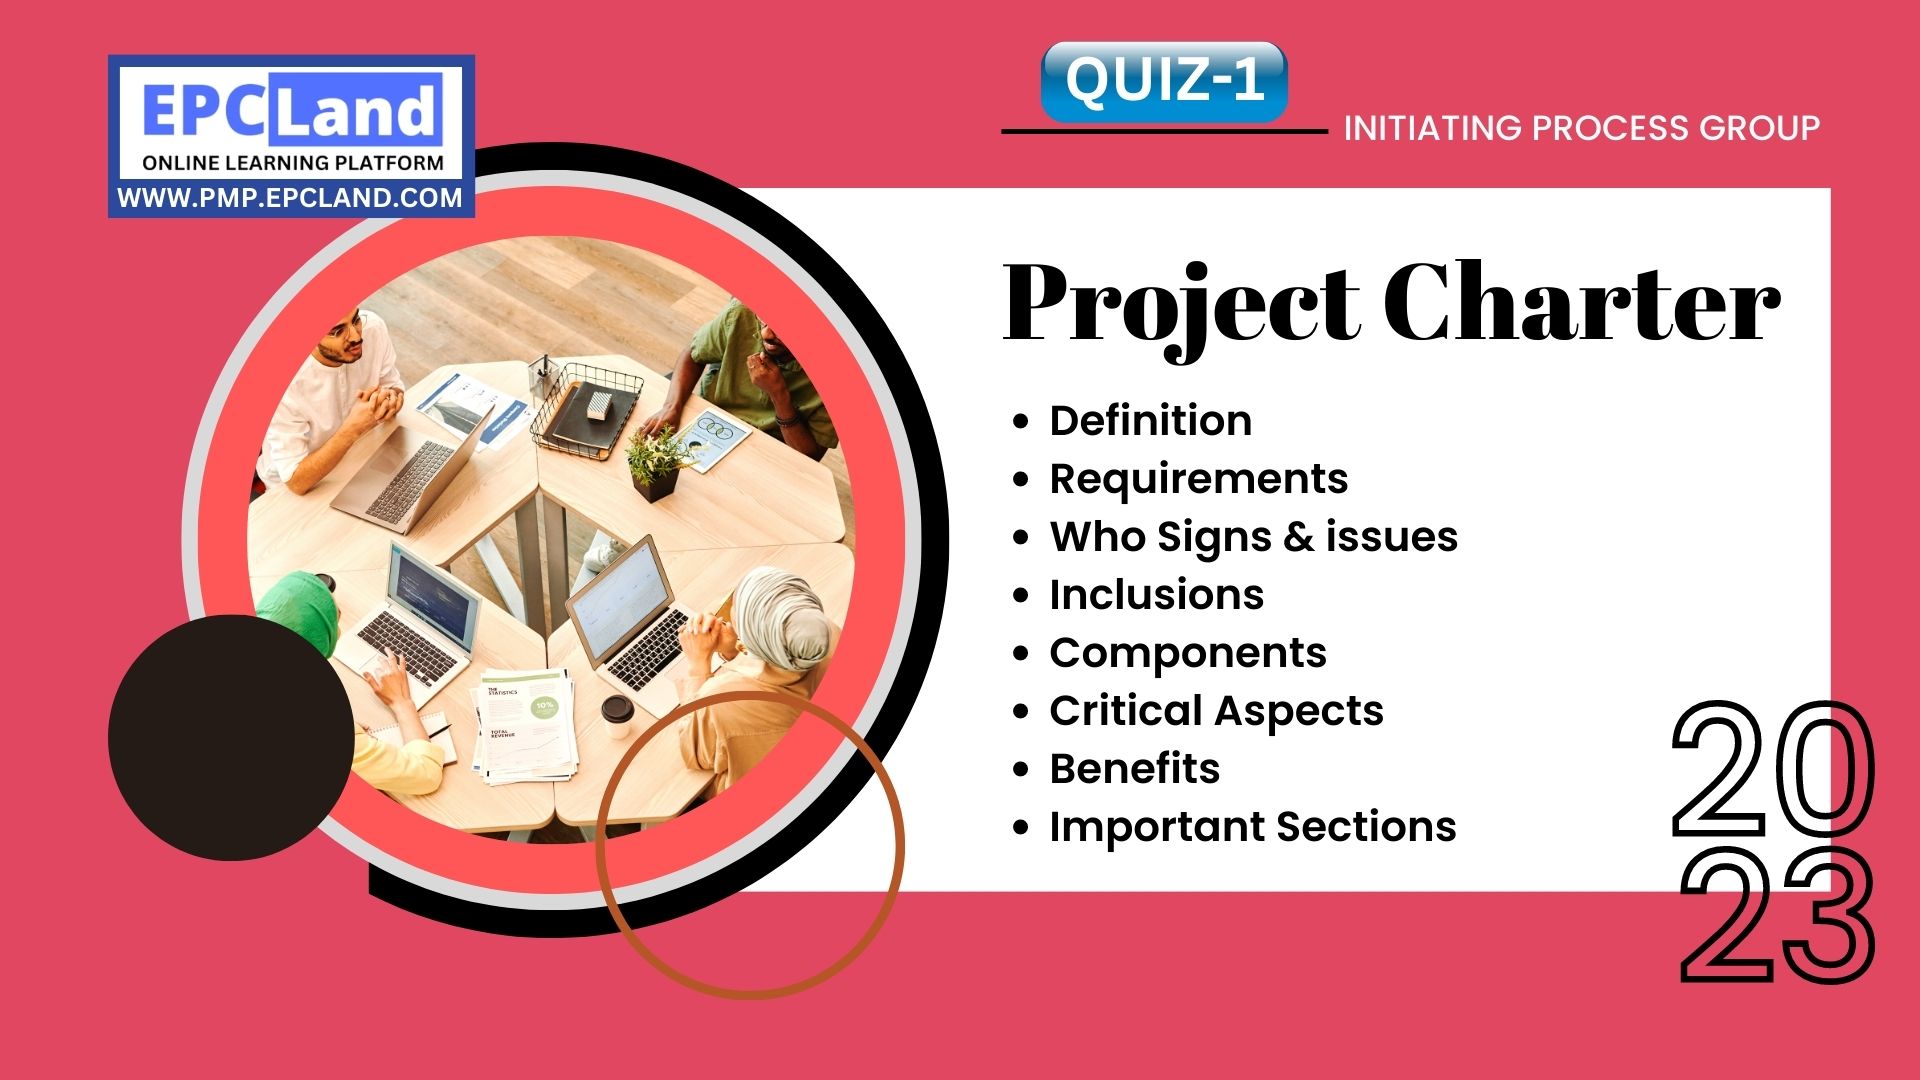 Project Charter Quiz-1